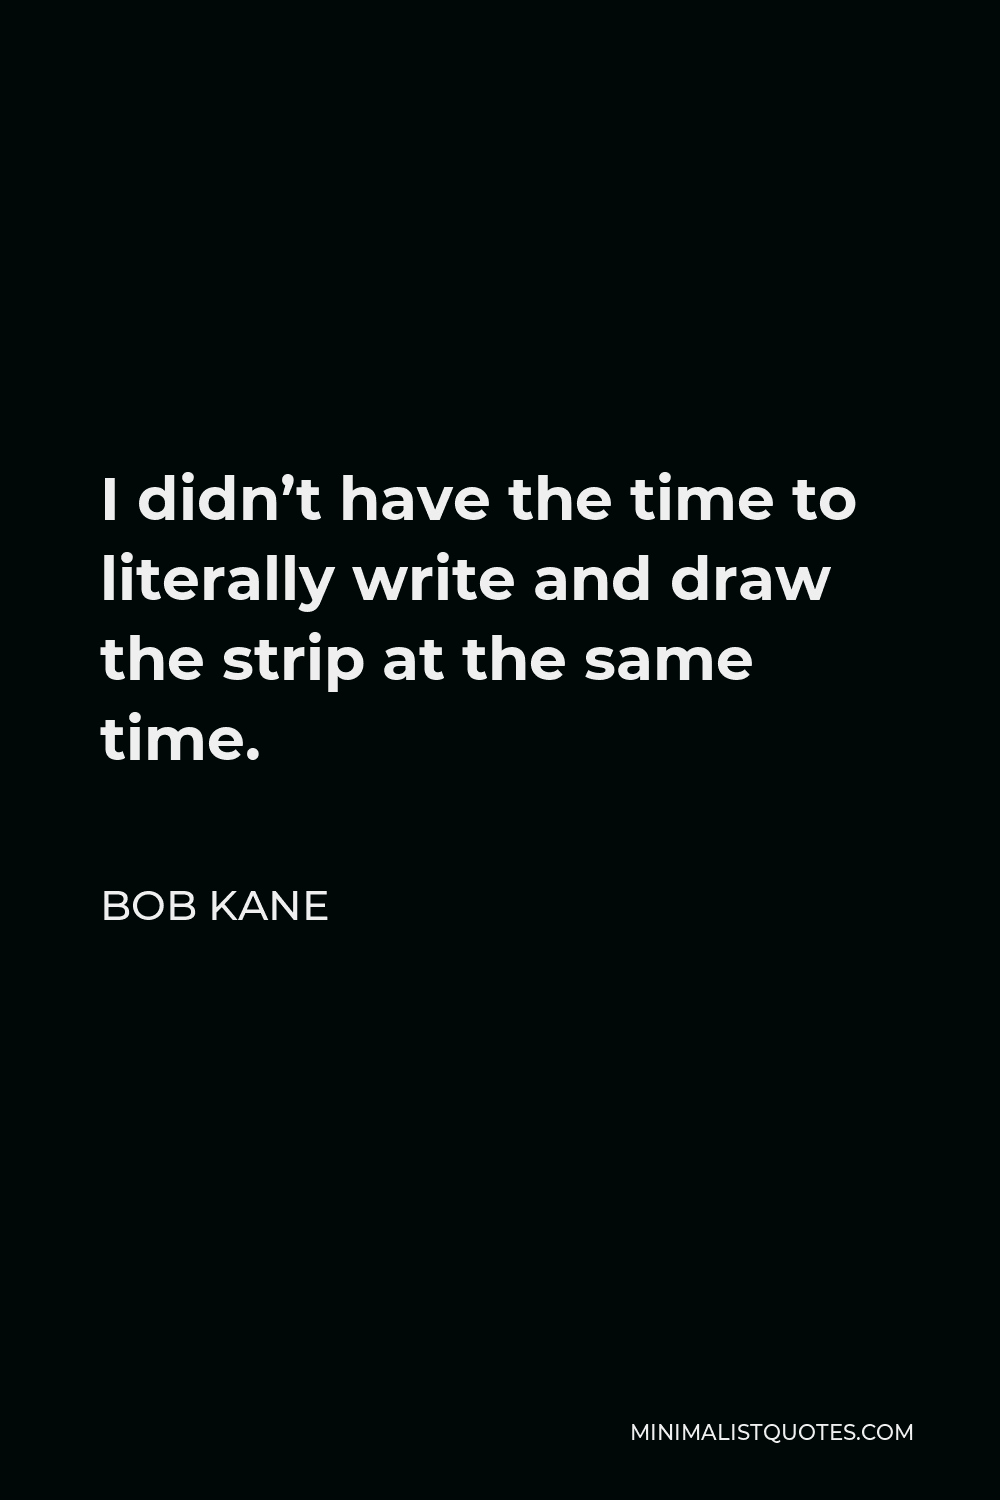 Bob Kane Quote - I didn’t have the time to literally write and draw the strip at the same time.